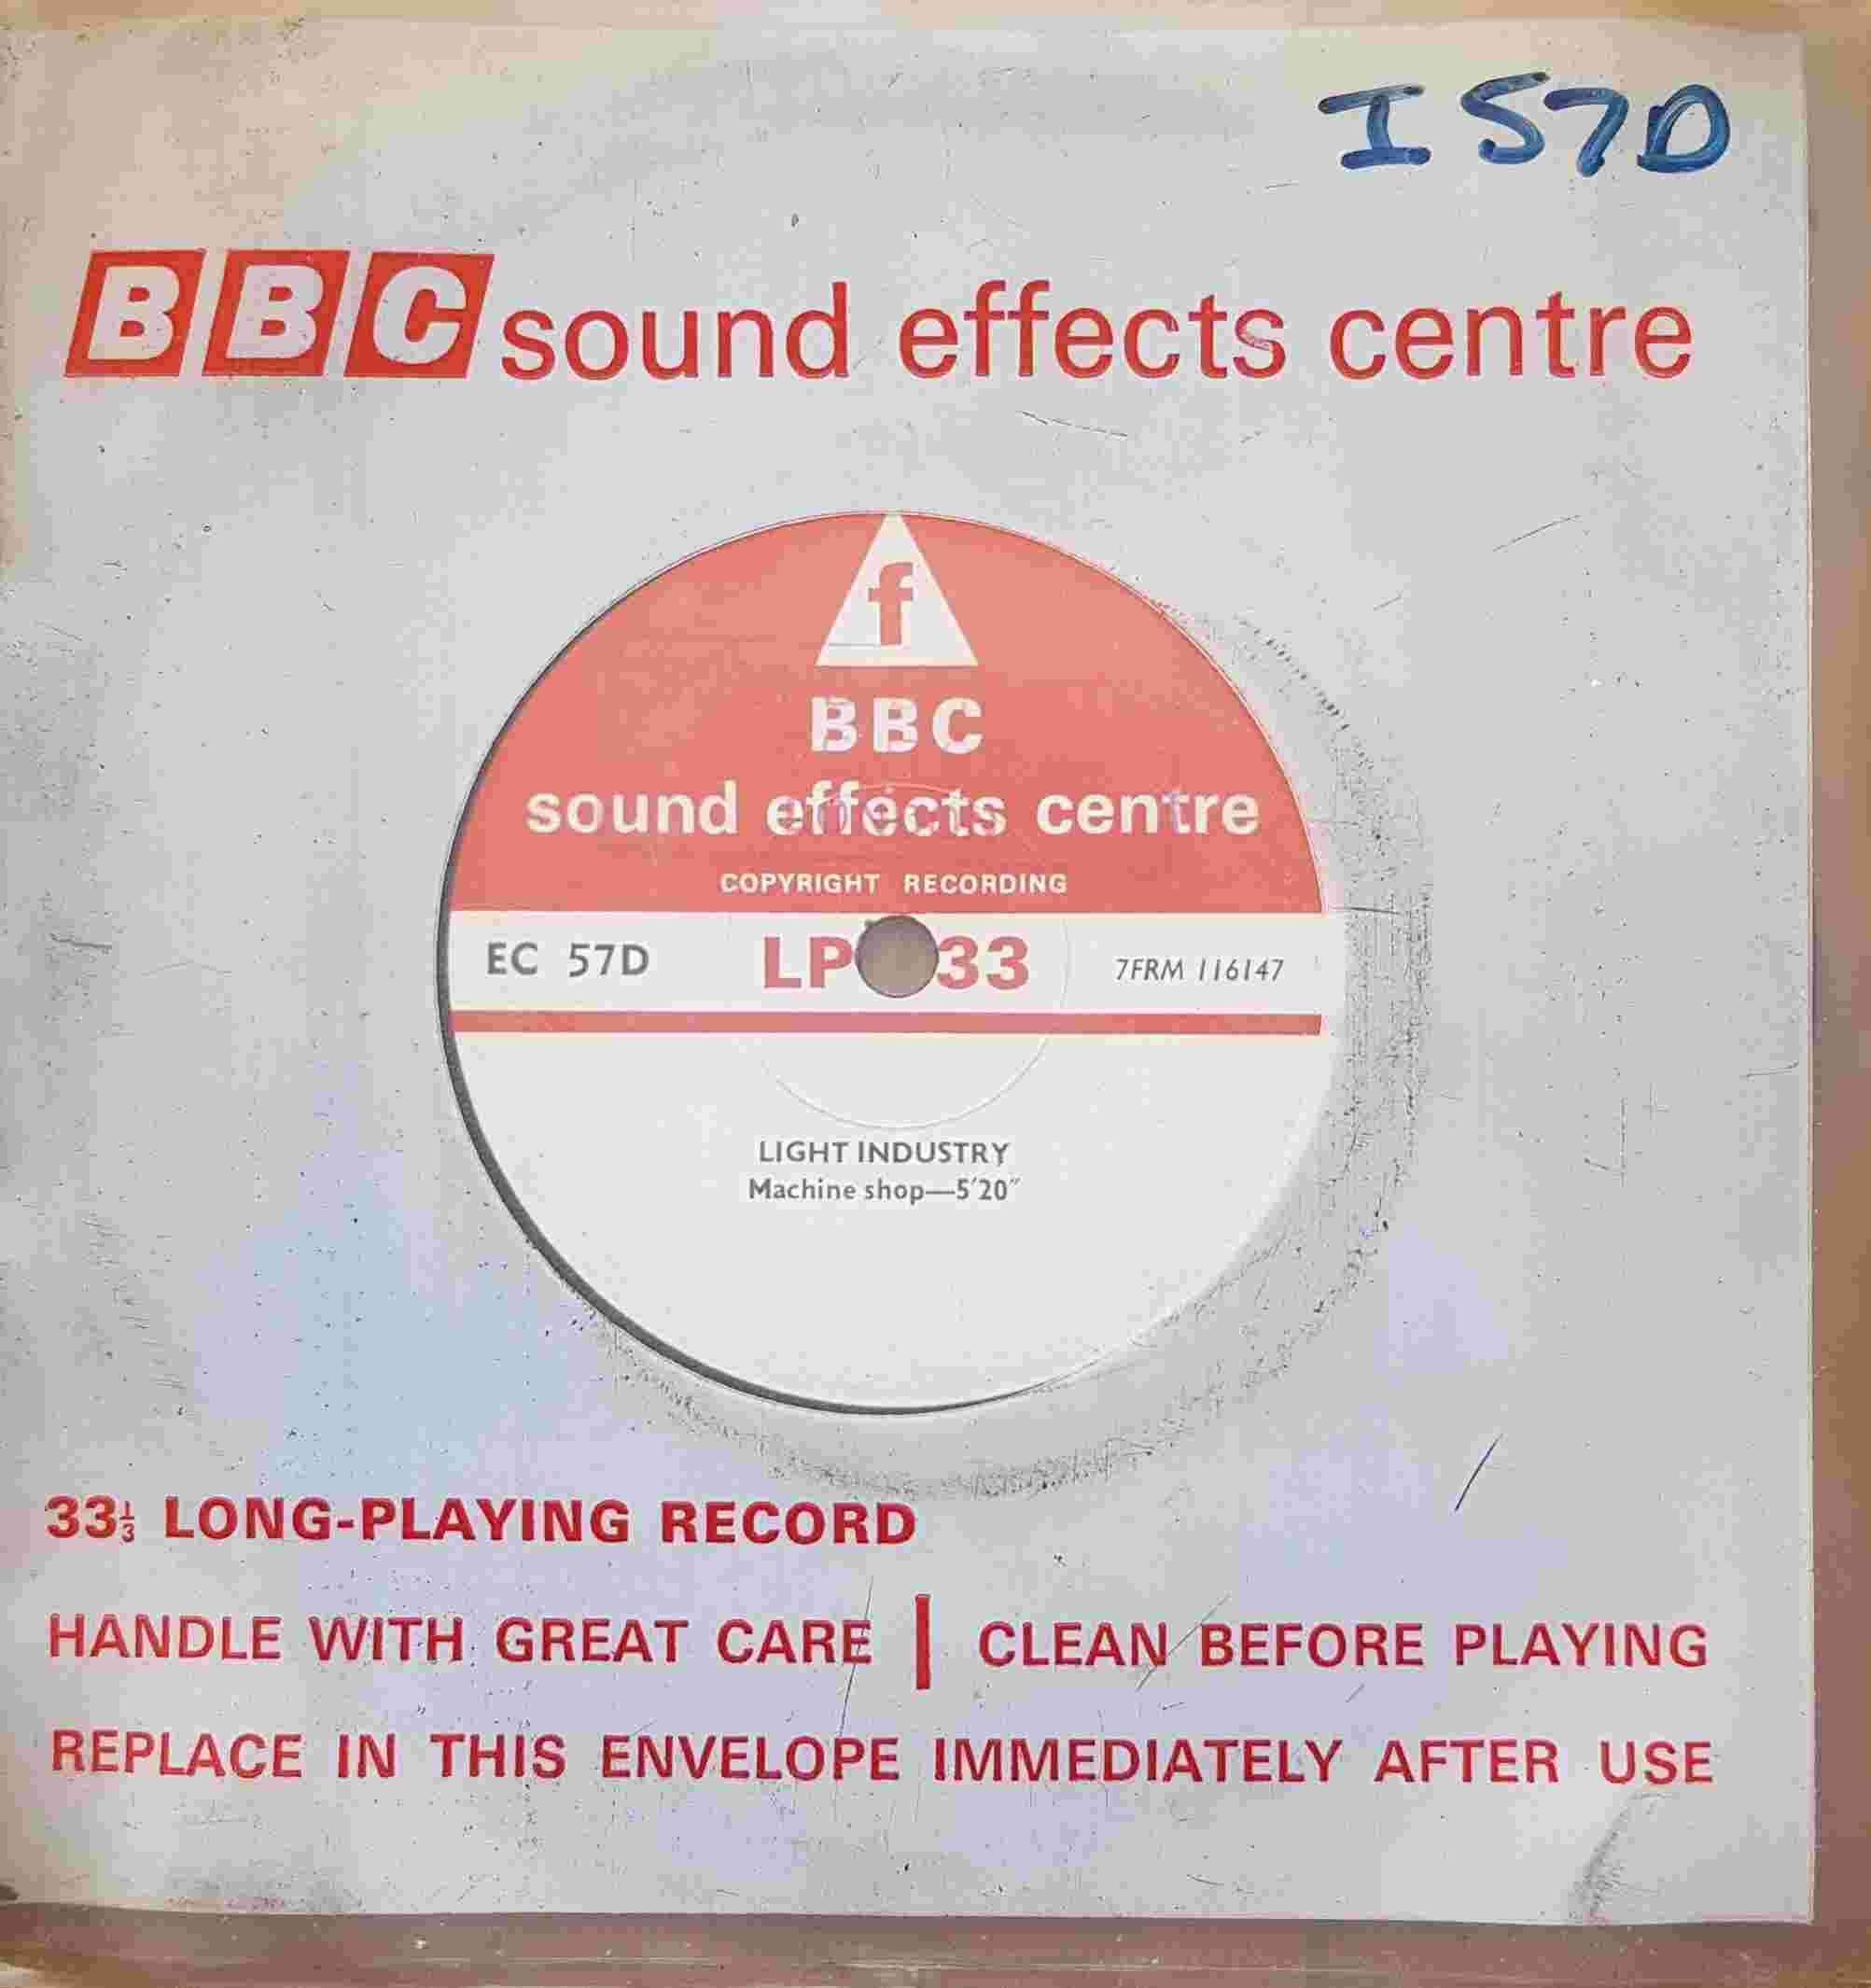 Picture of EC 57D Light industry by artist Not registered from the BBC records and Tapes library